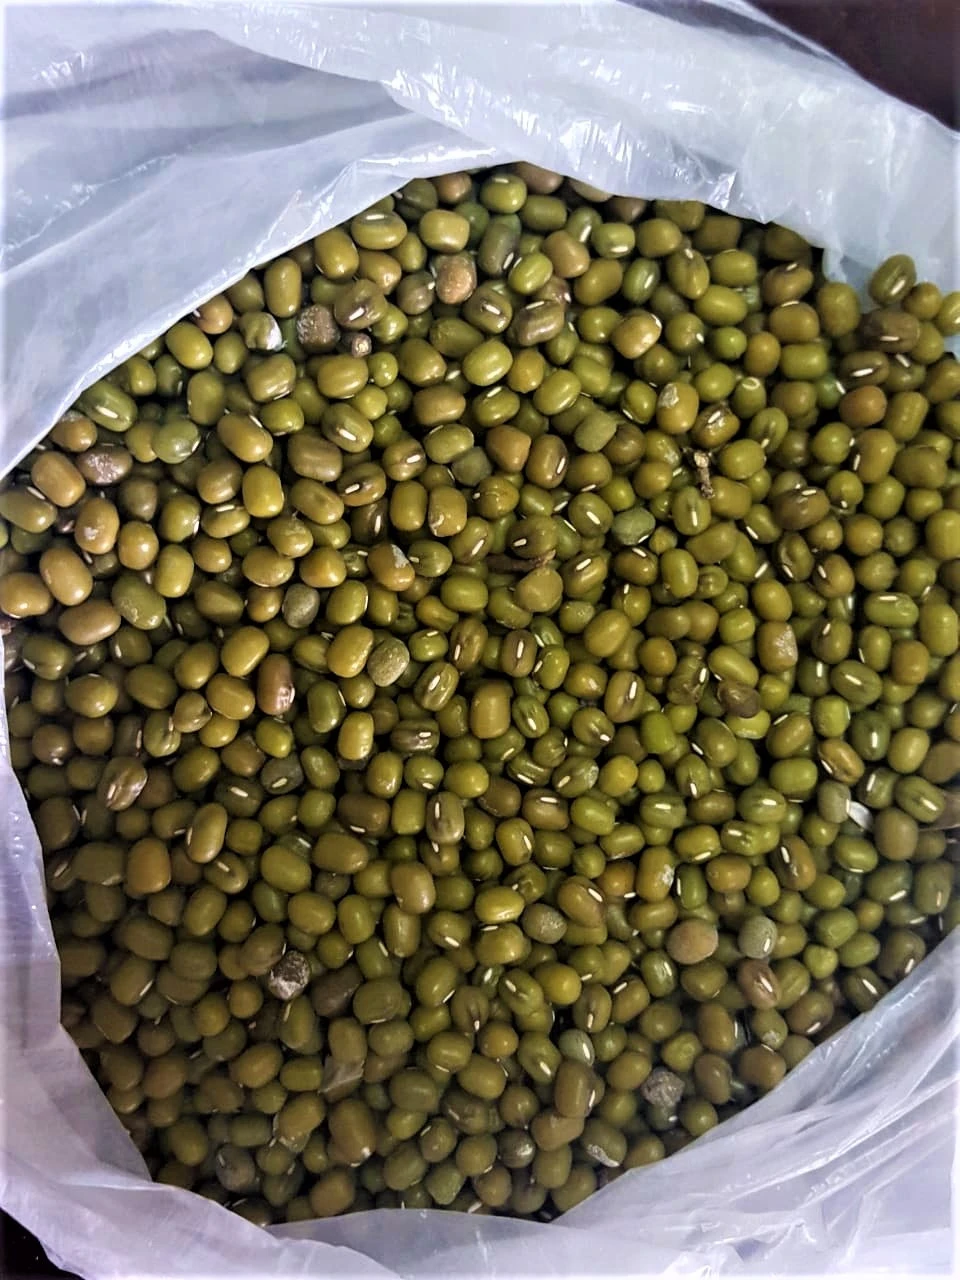 Healthy Exporting Agricultural Vegetables Fresh Green Beans With Good Price From Trung My Company Vietnam